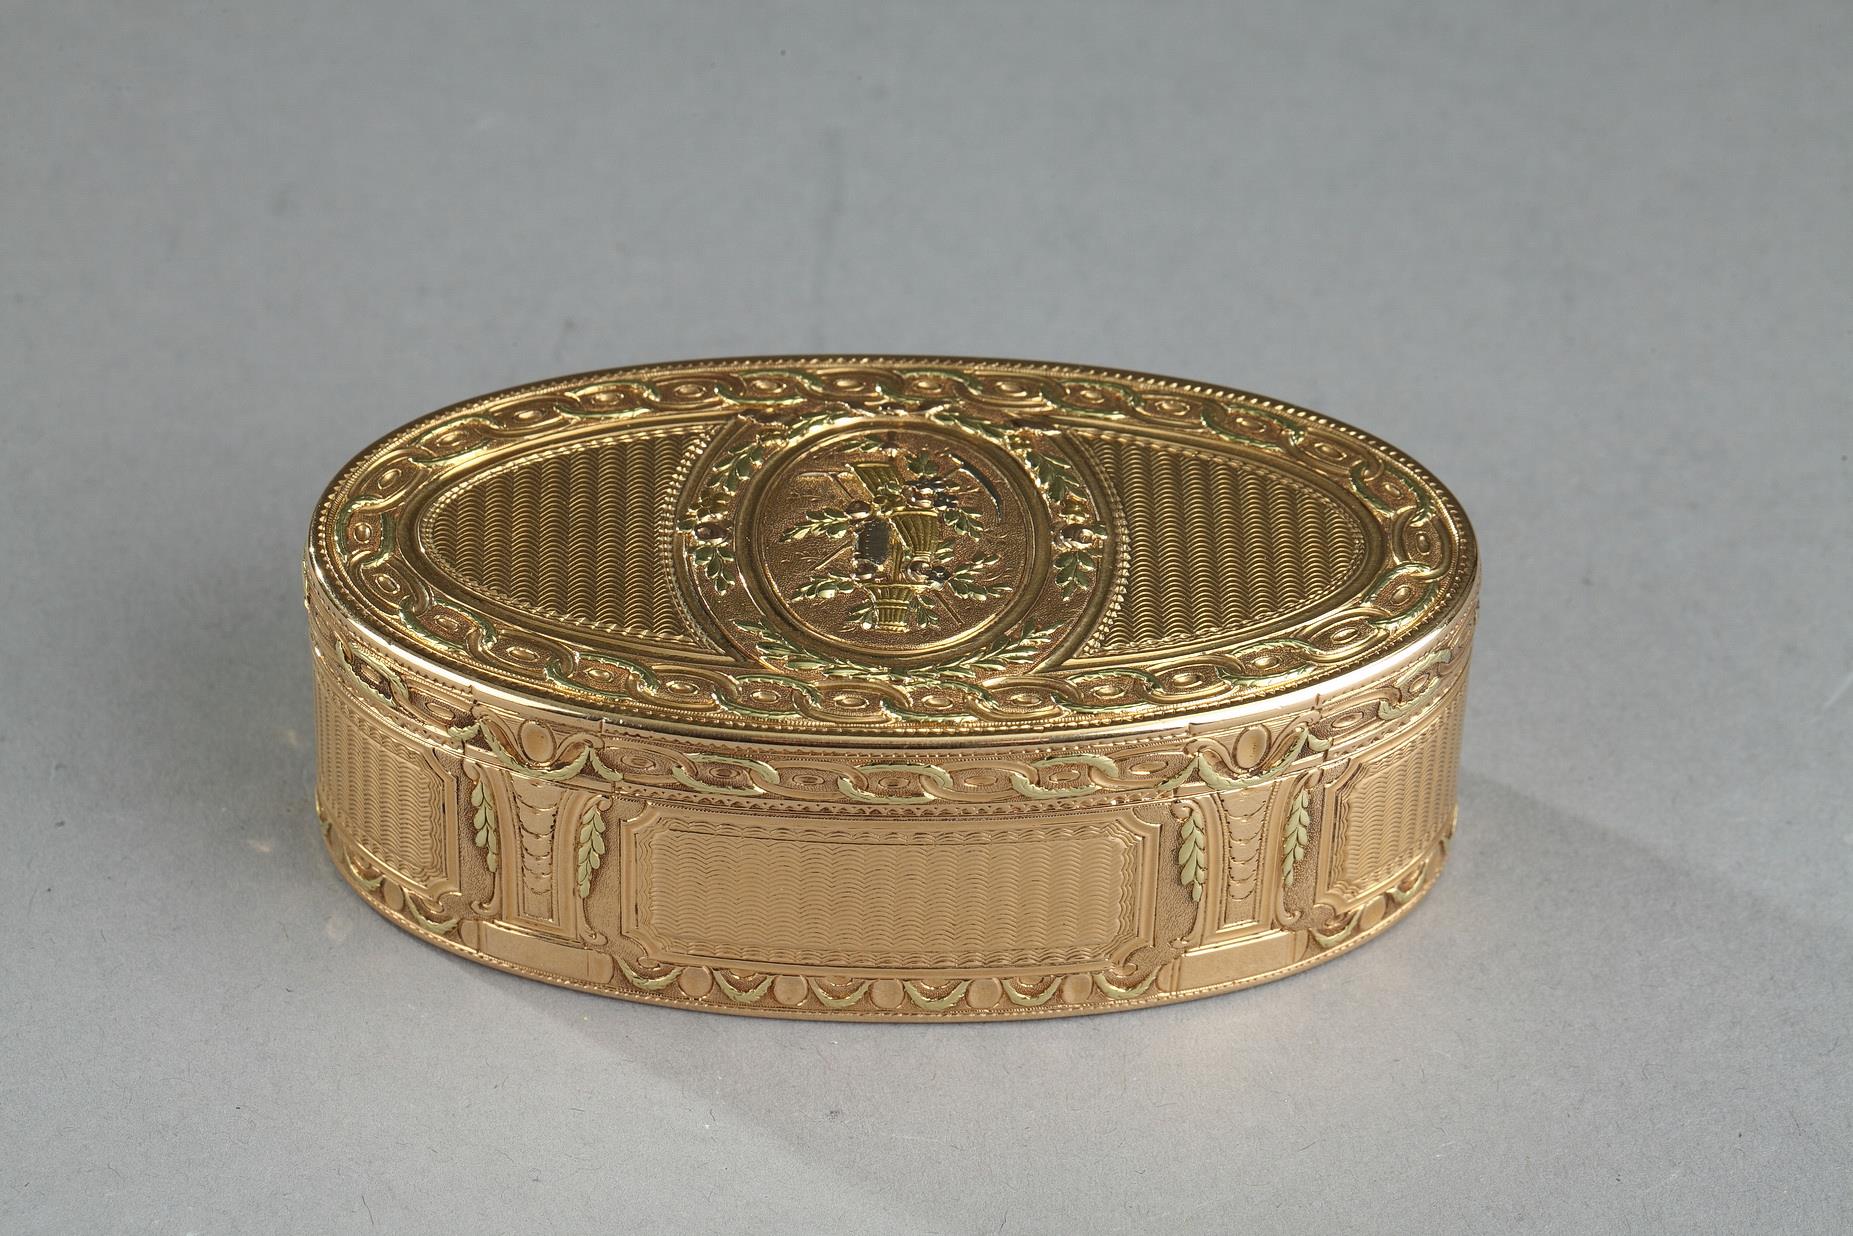 Louis XVI Gold Box, from the 18th century